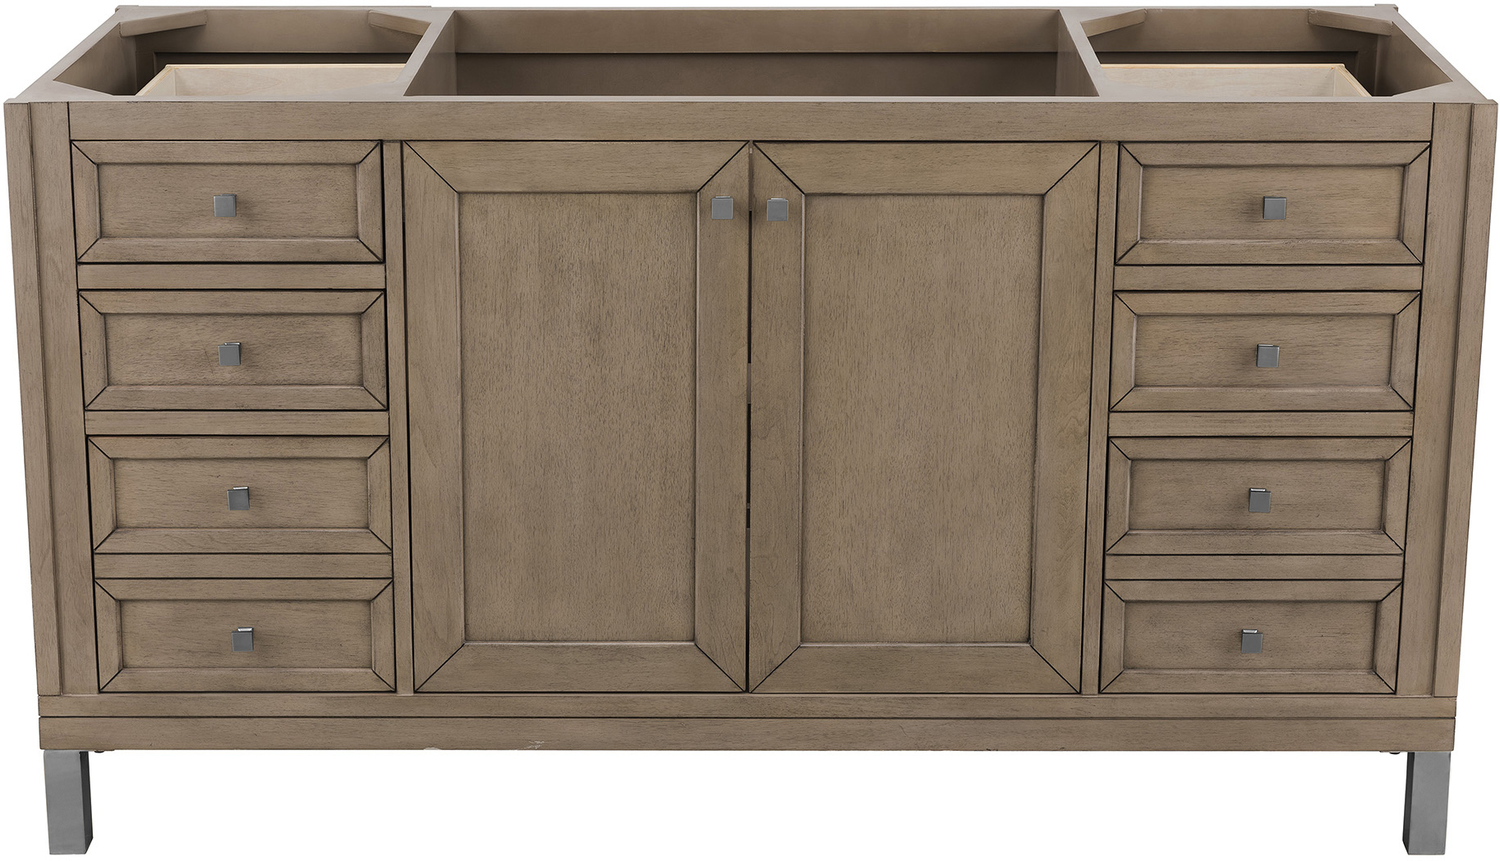 60 inch vanity countertop James Martin Cabinet Whitewashed Walnut Contemporary/Modern, Transitional